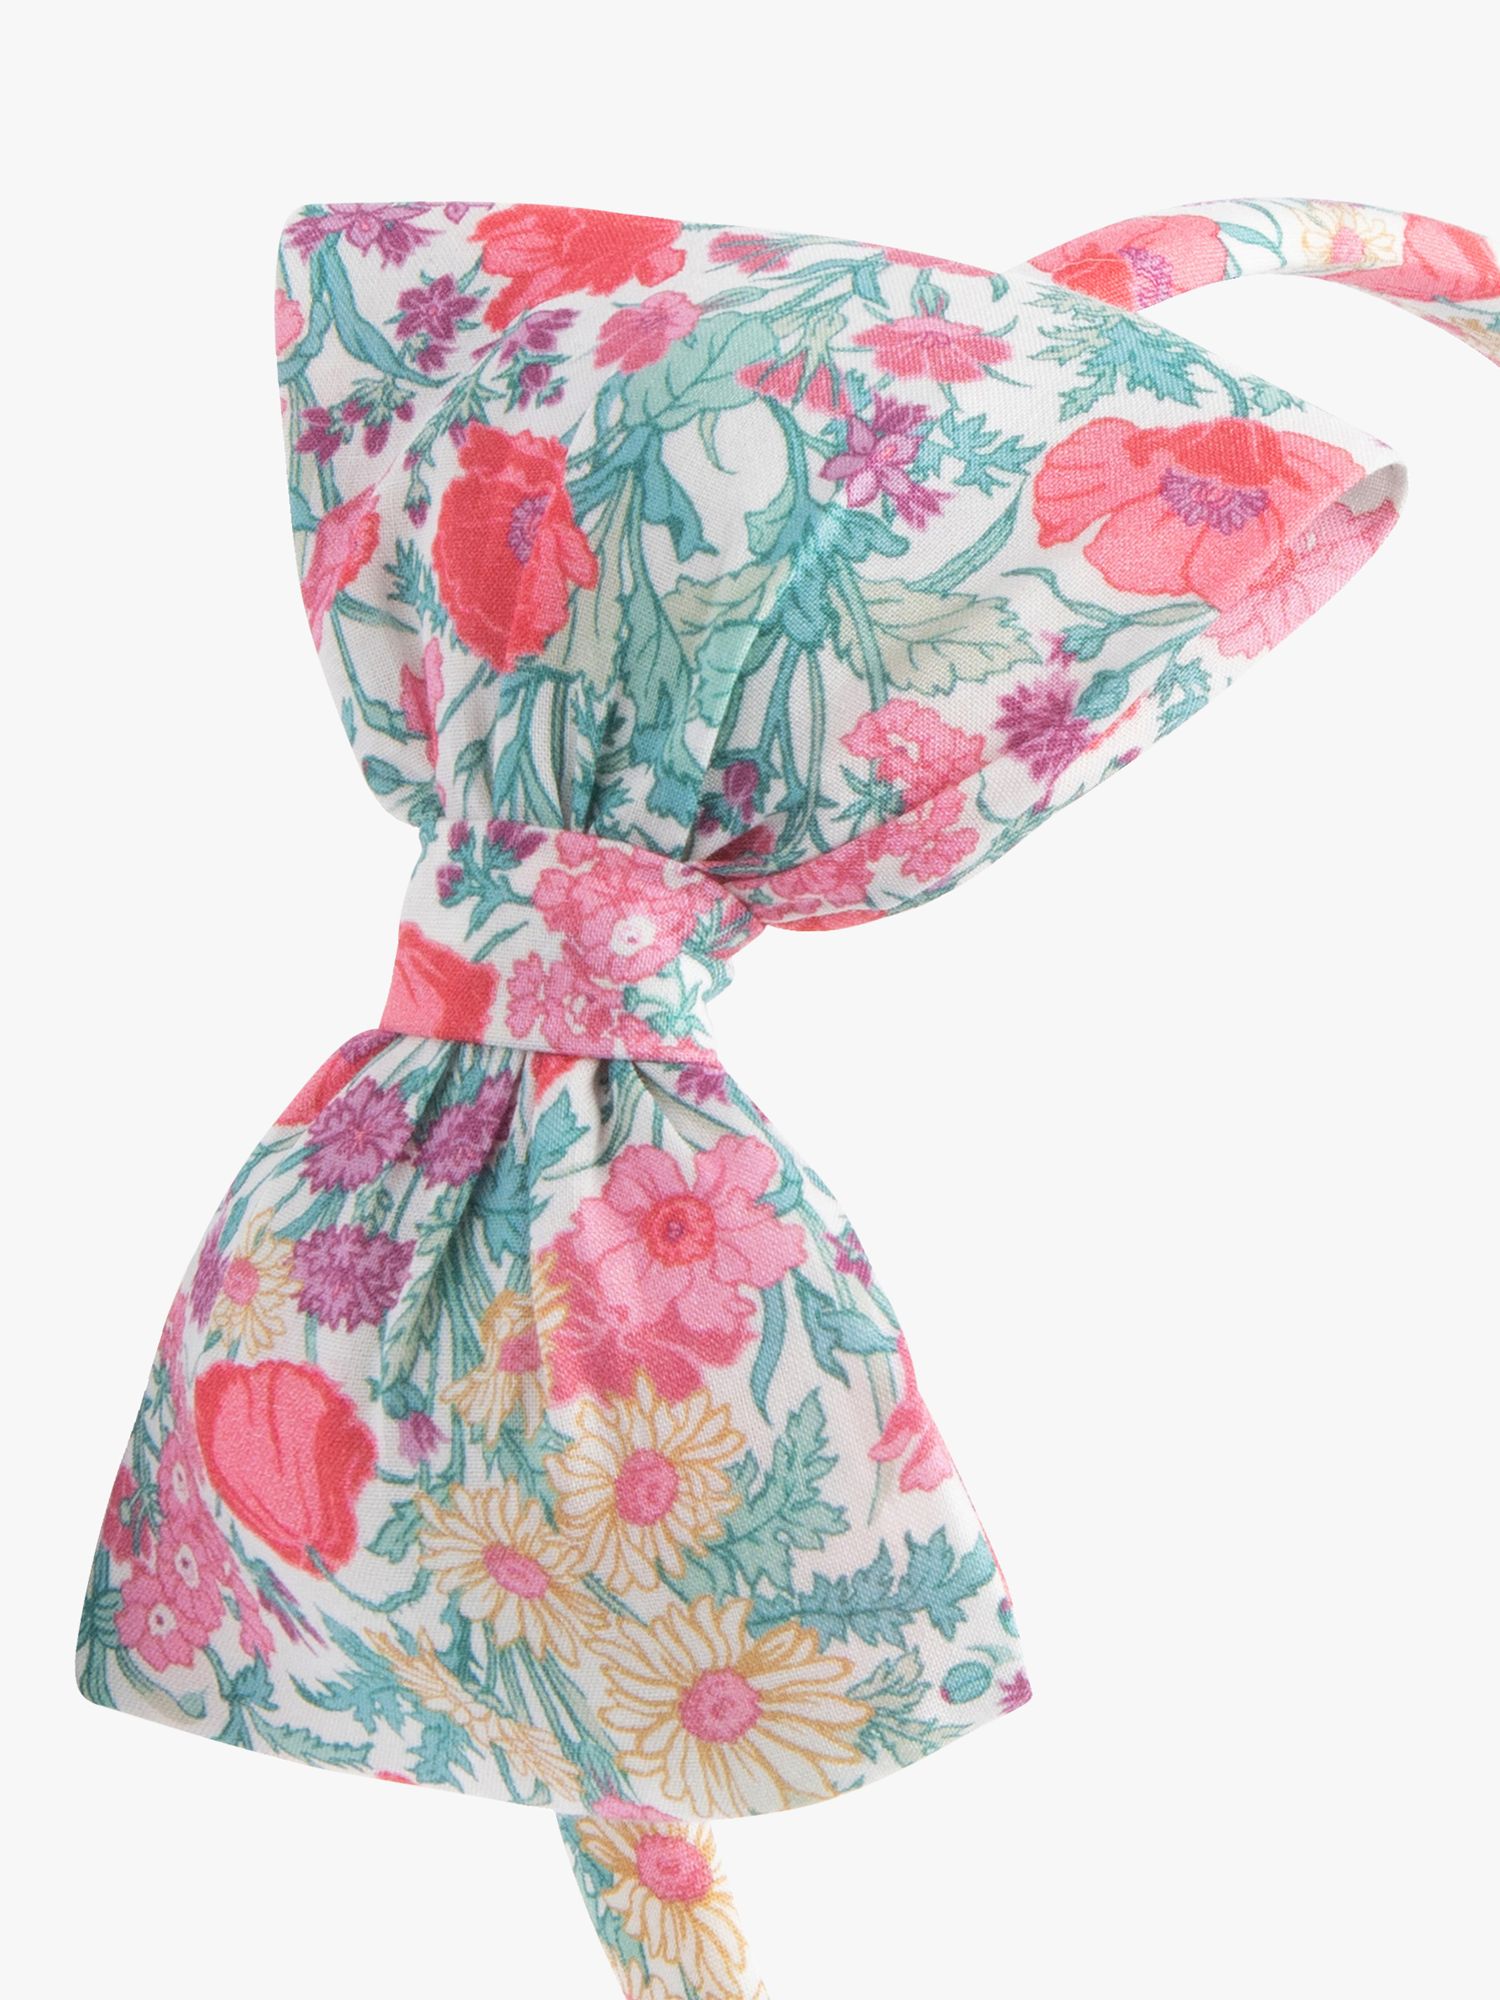 Buy Trotters Kids' Liberty Florence May Big Bow Headband, Multi Online at johnlewis.com